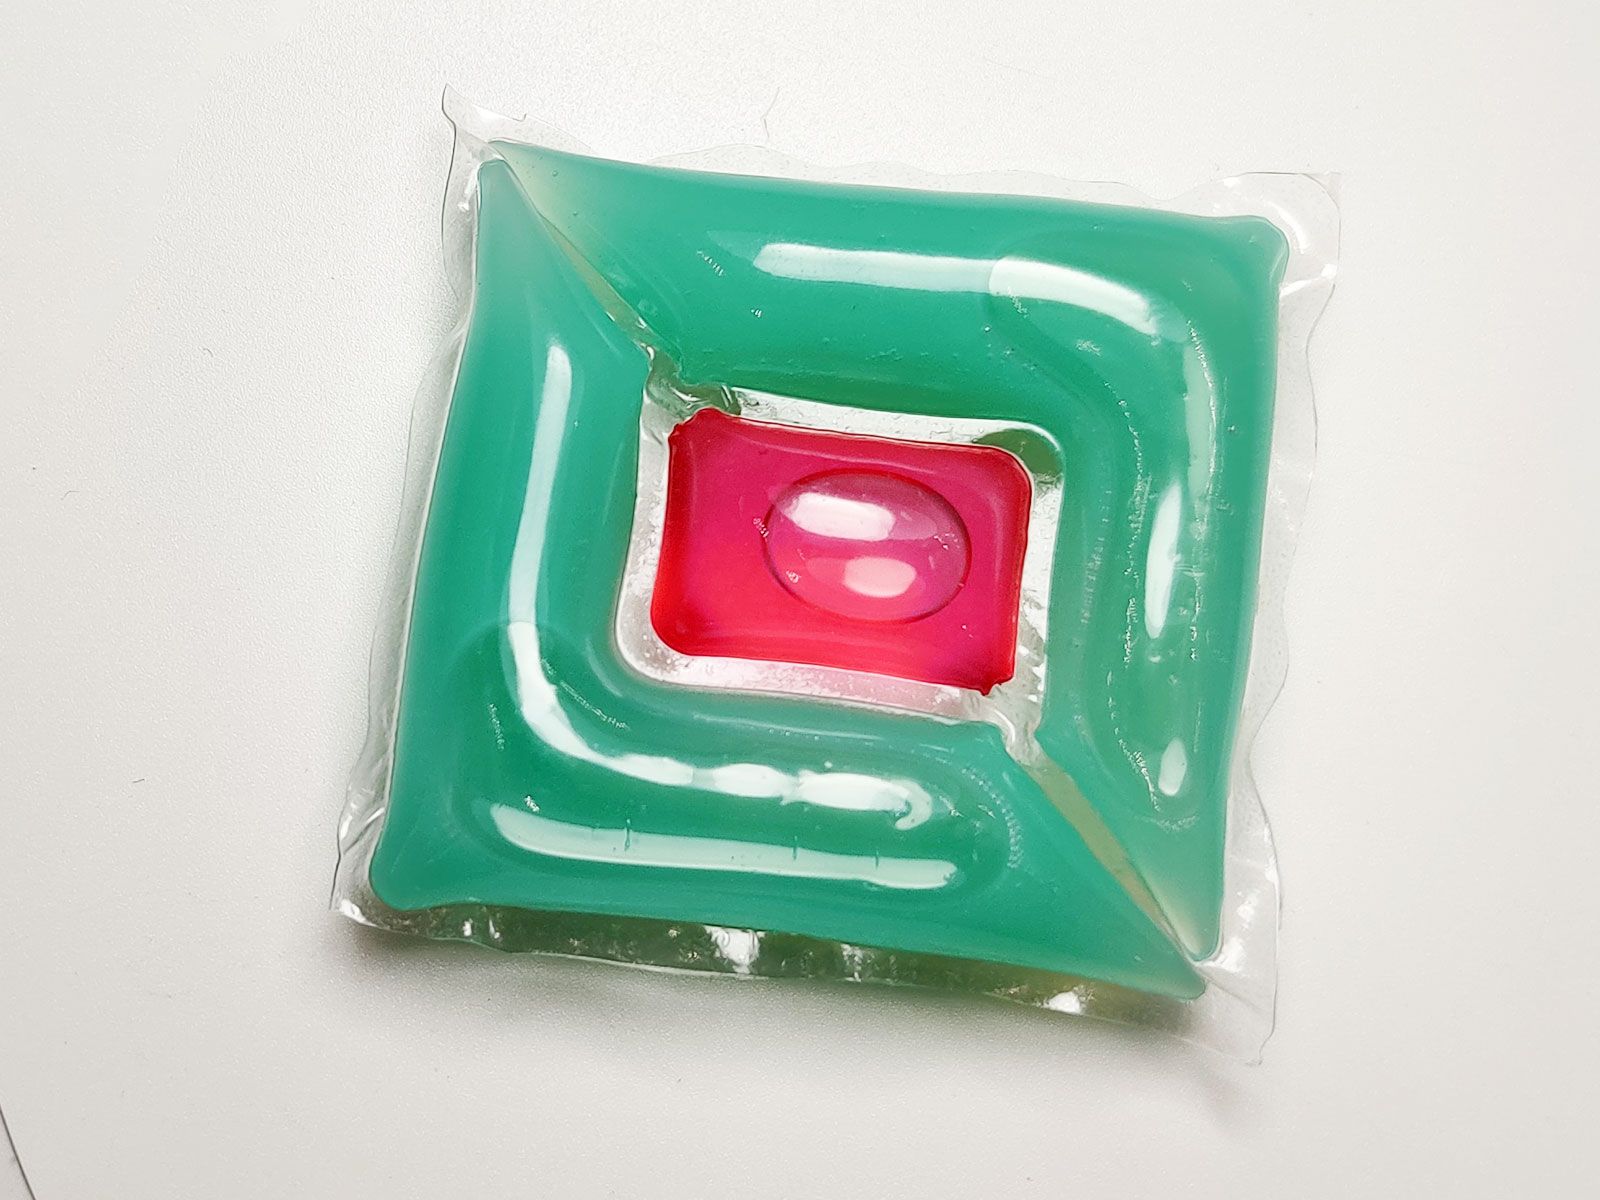 New laundry pods shape design three chamber with red sqaure